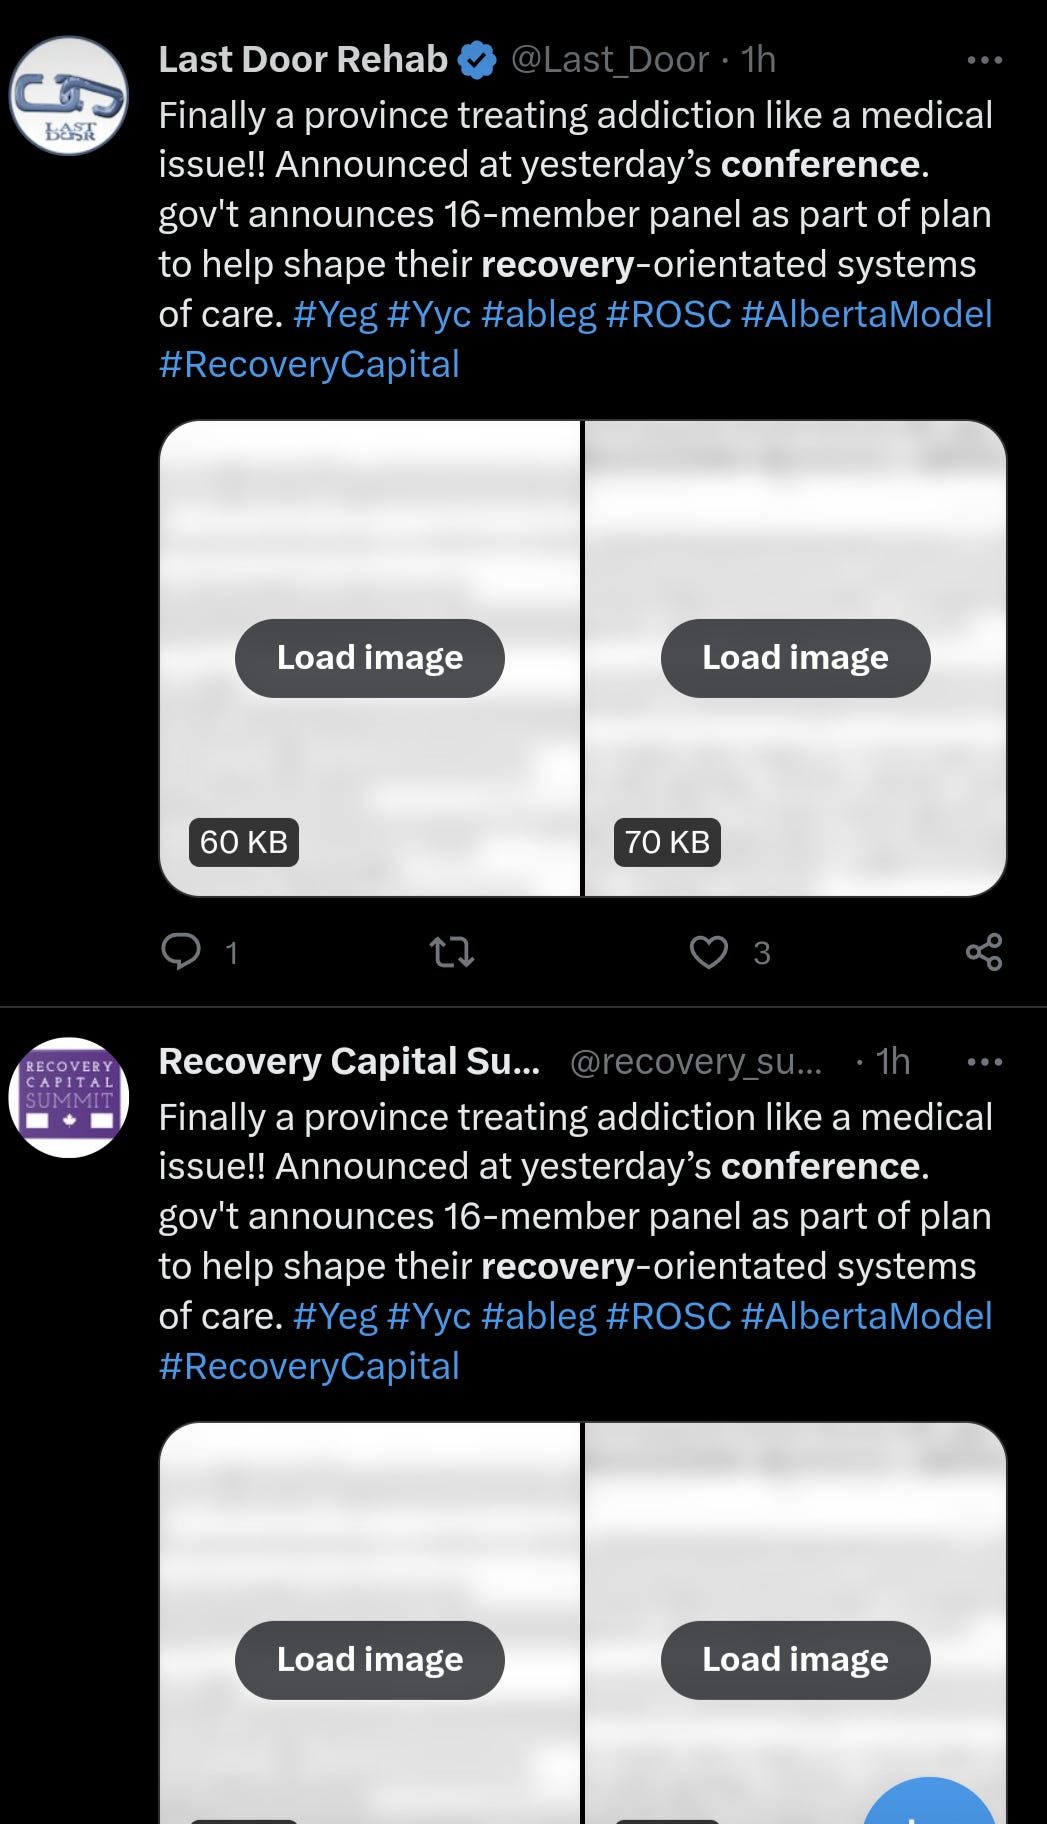 Tweets from last door rehab and recovery capital Summit that appear identical. Word for Word. Content of the tweets is just about putting the Alberta government on the back for its recovery oriented system of care.